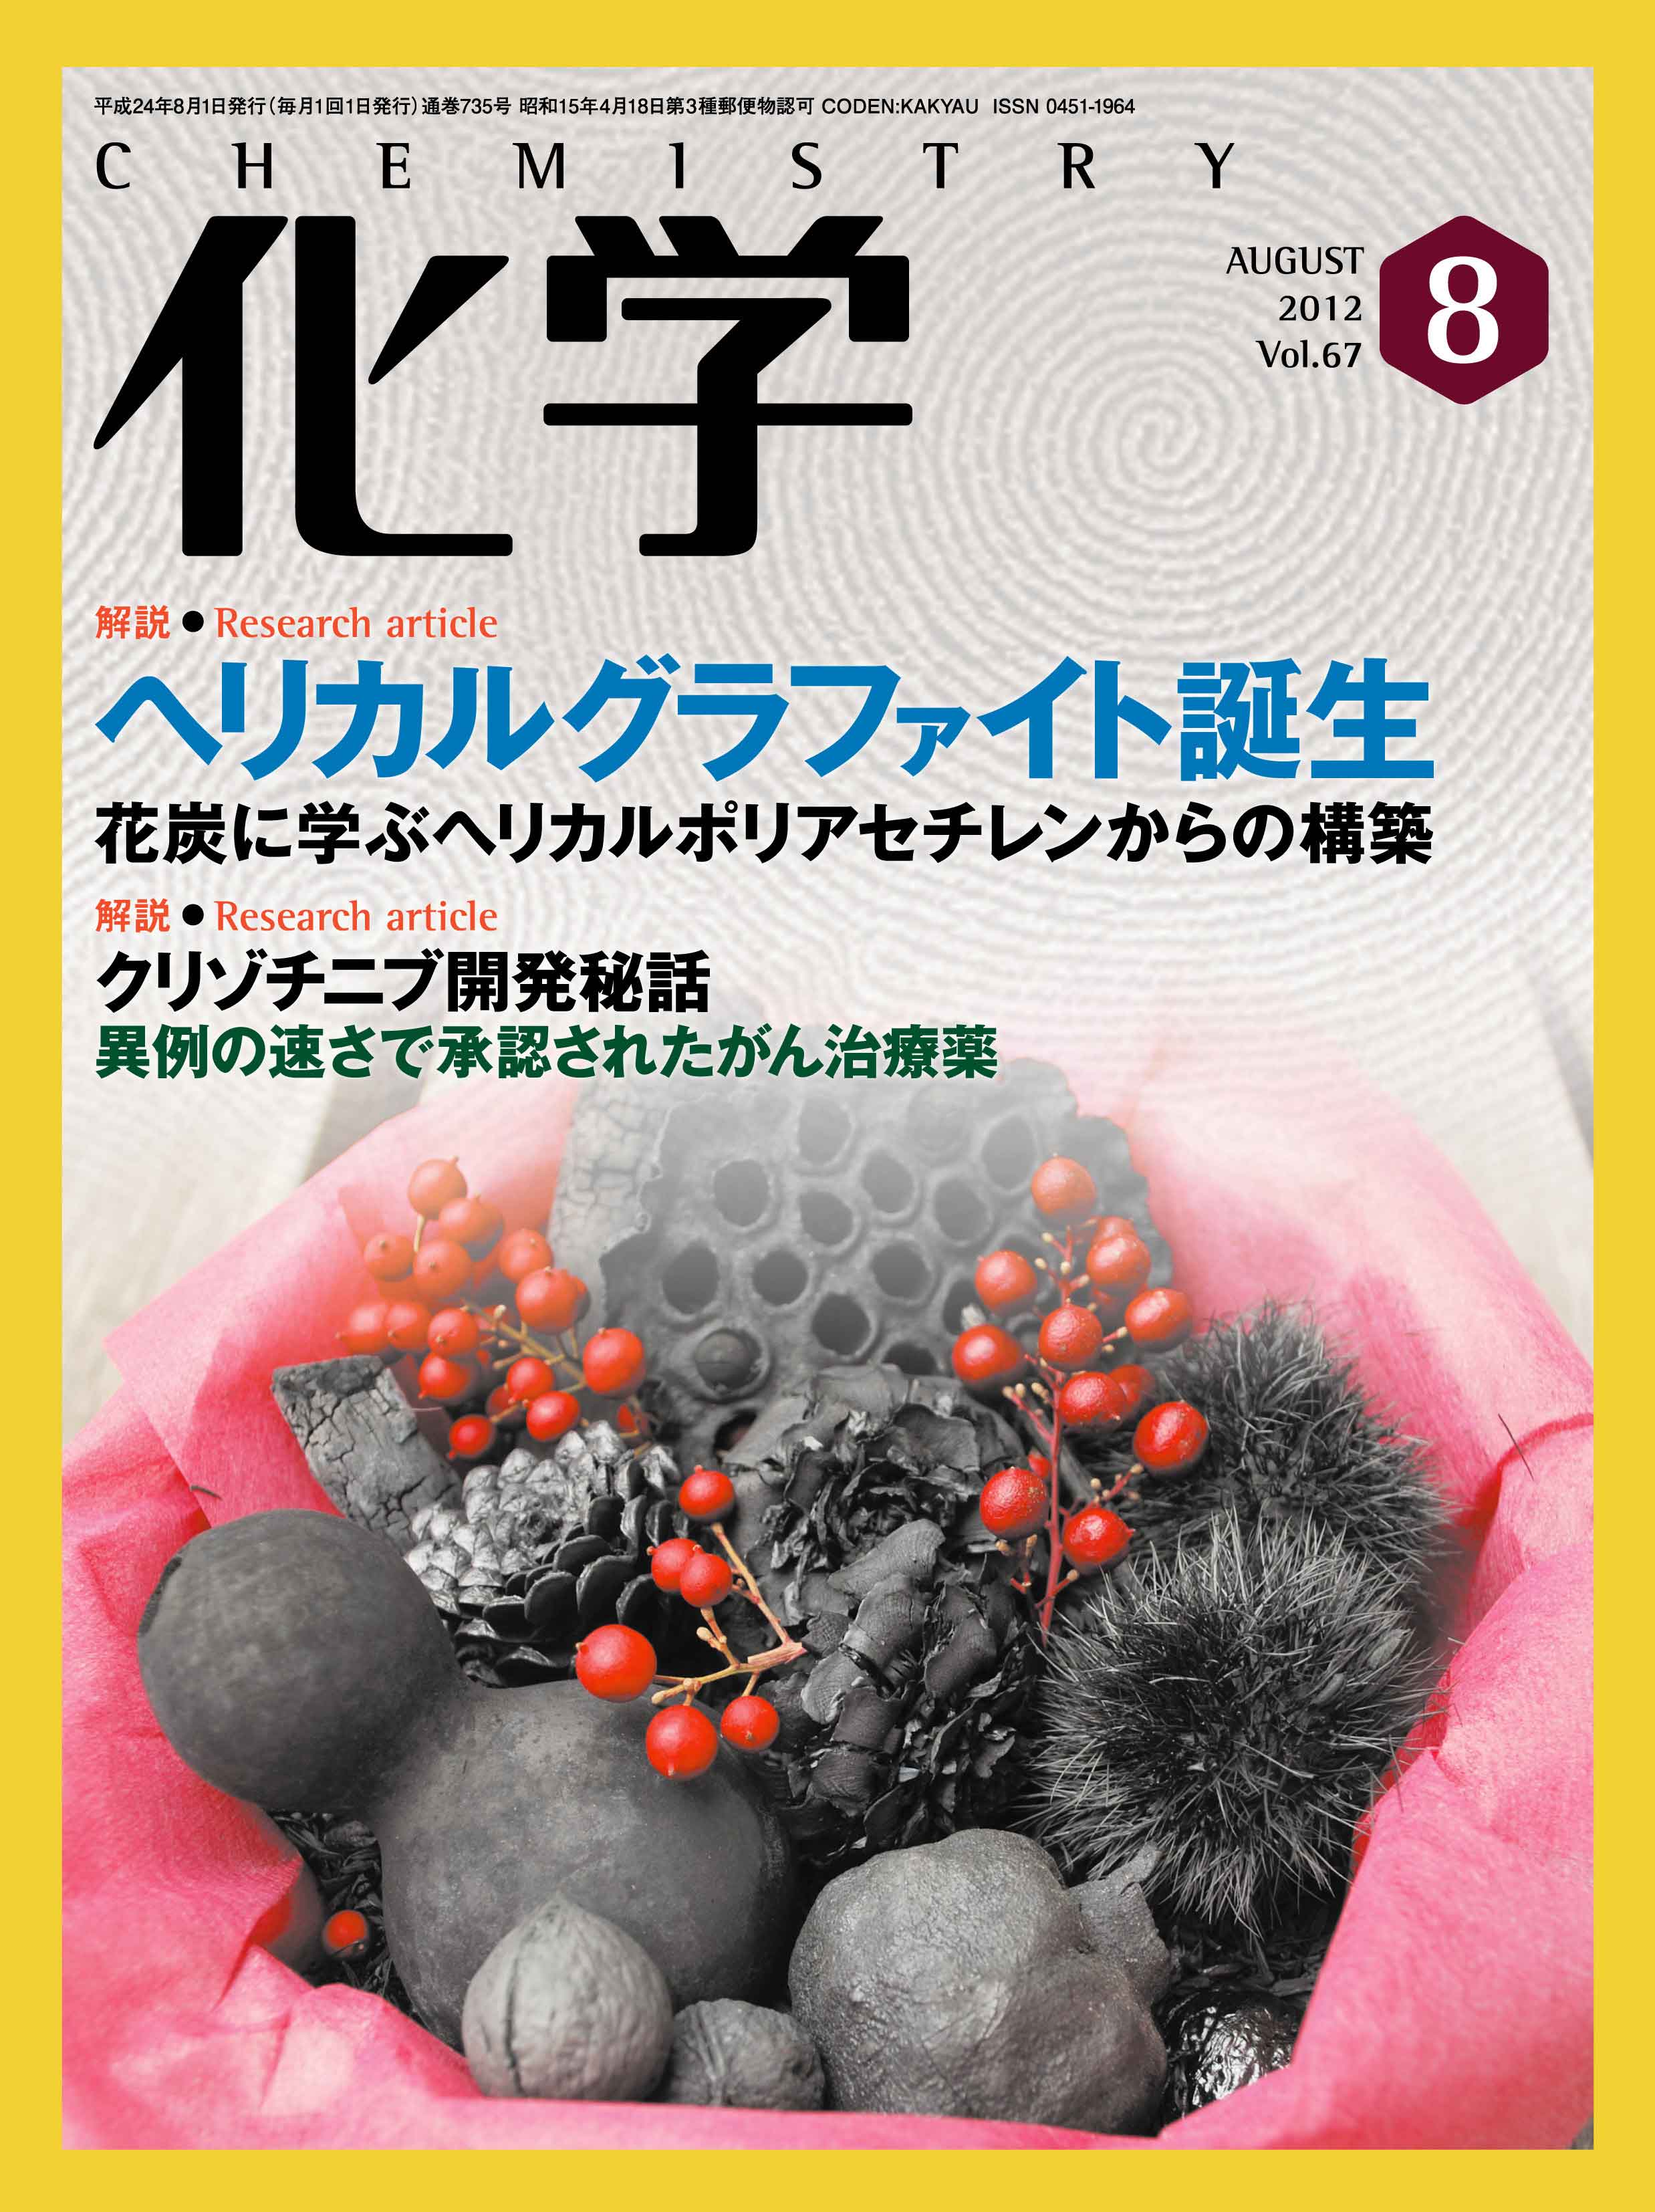 Biomaterials Science Featured In Kagaku Chemistry Biomaterials Science Blog